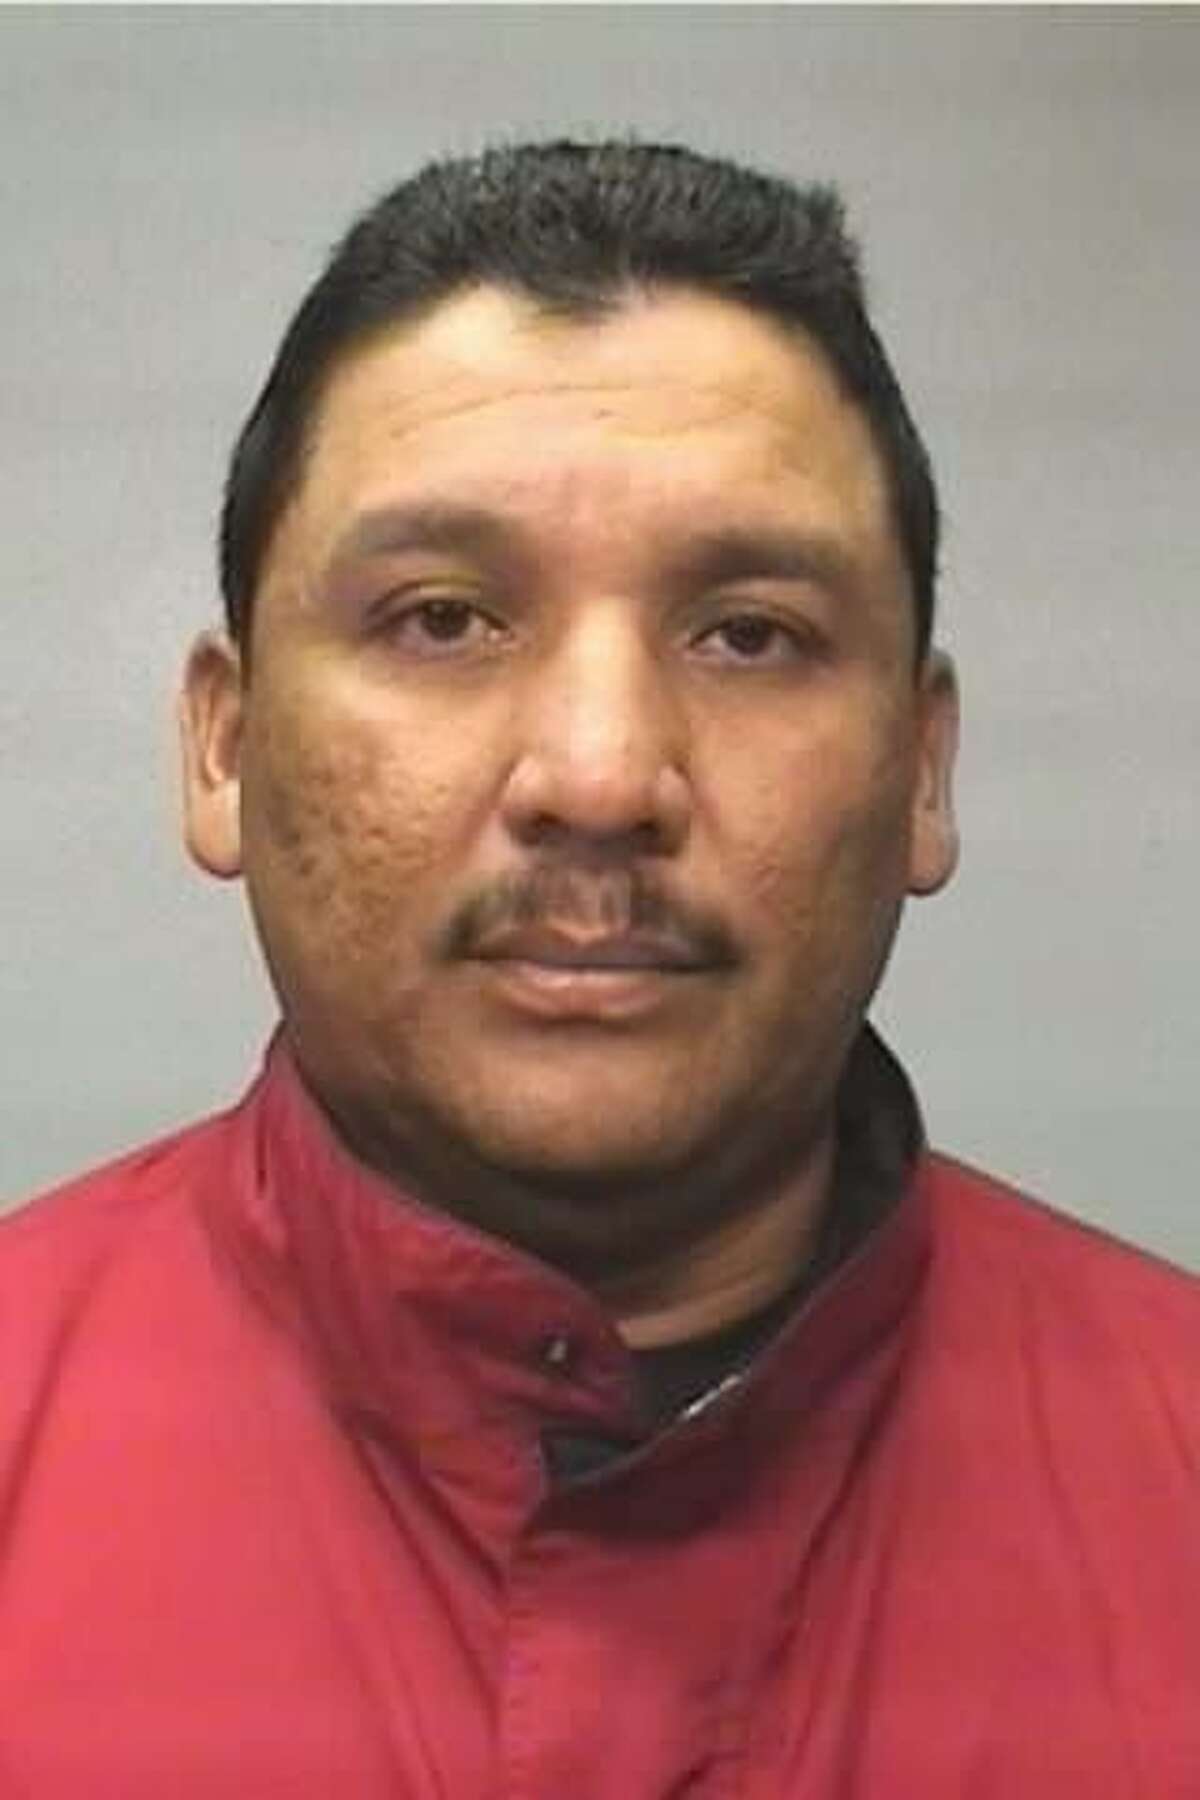 Police Chief Orlando Rodriguez told the McAllen Monitor that Officer Ruben Castillo, 45, was placed on administrative leave without pay two weeks ago. Castillo turned himself in DDec. 17, 2014, and was charged with state-jail felony theft and forgery, according to the Brownsville Police Department's blog.